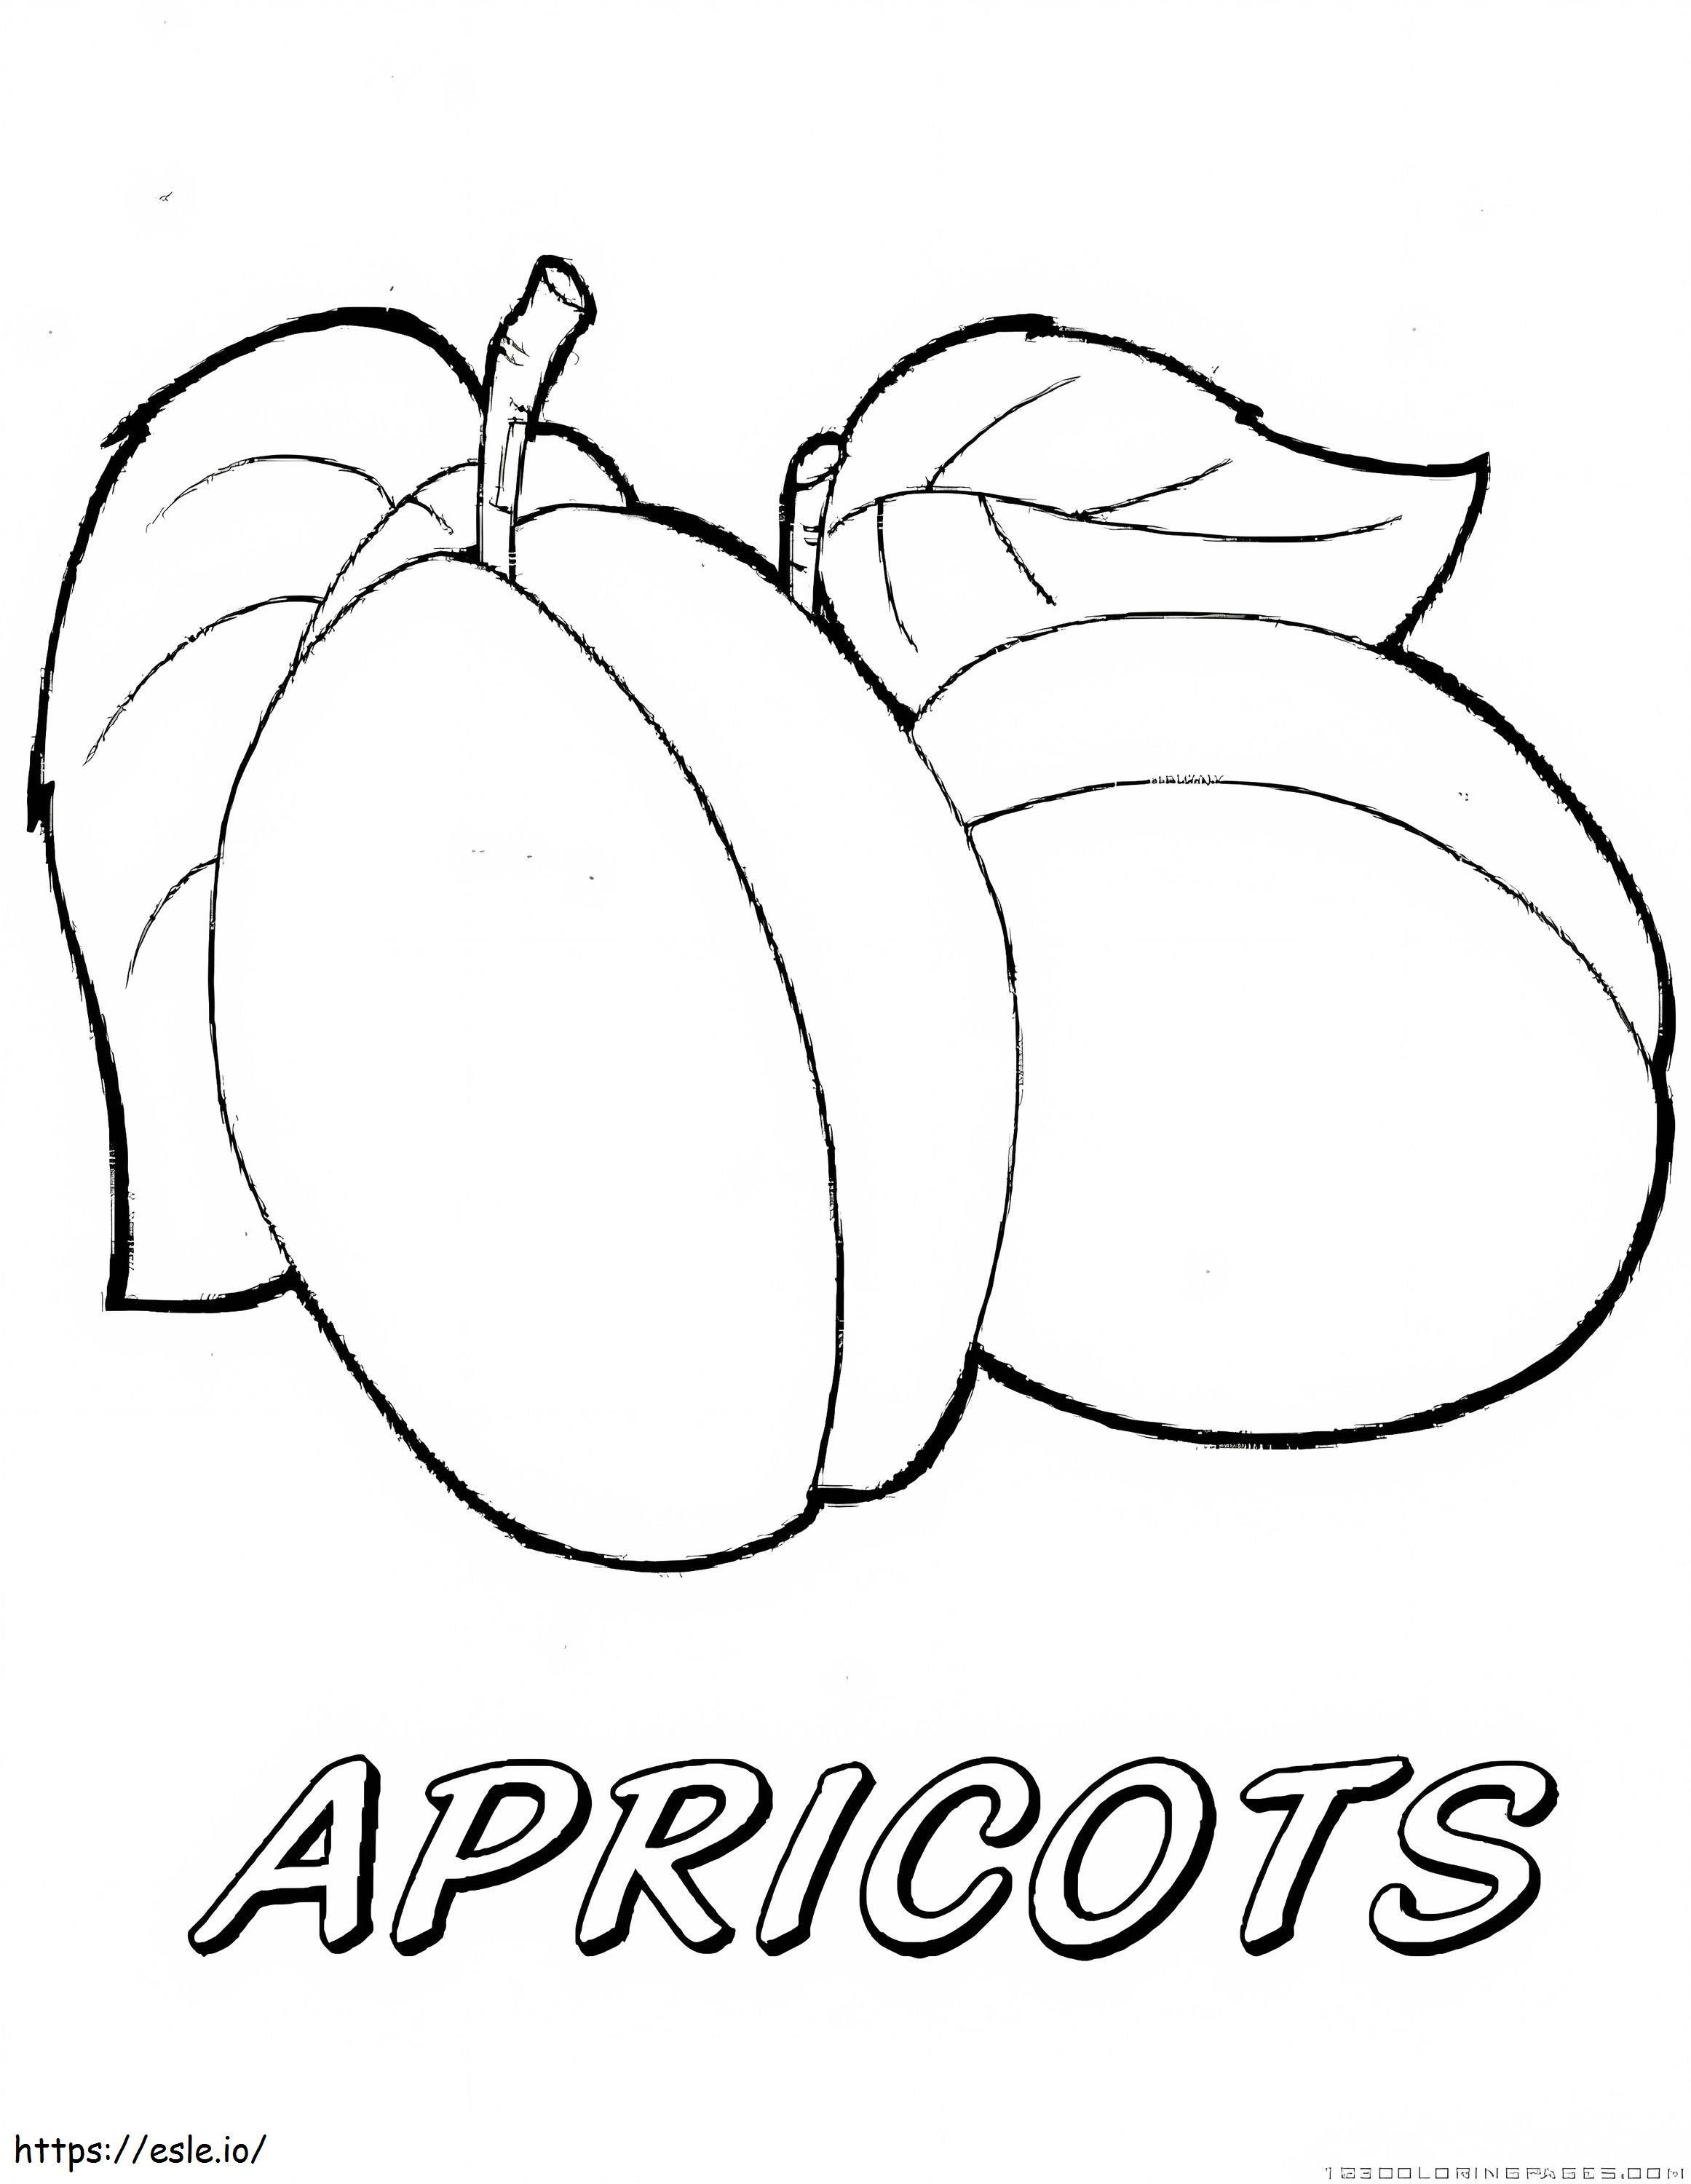 Two Apricot coloring page